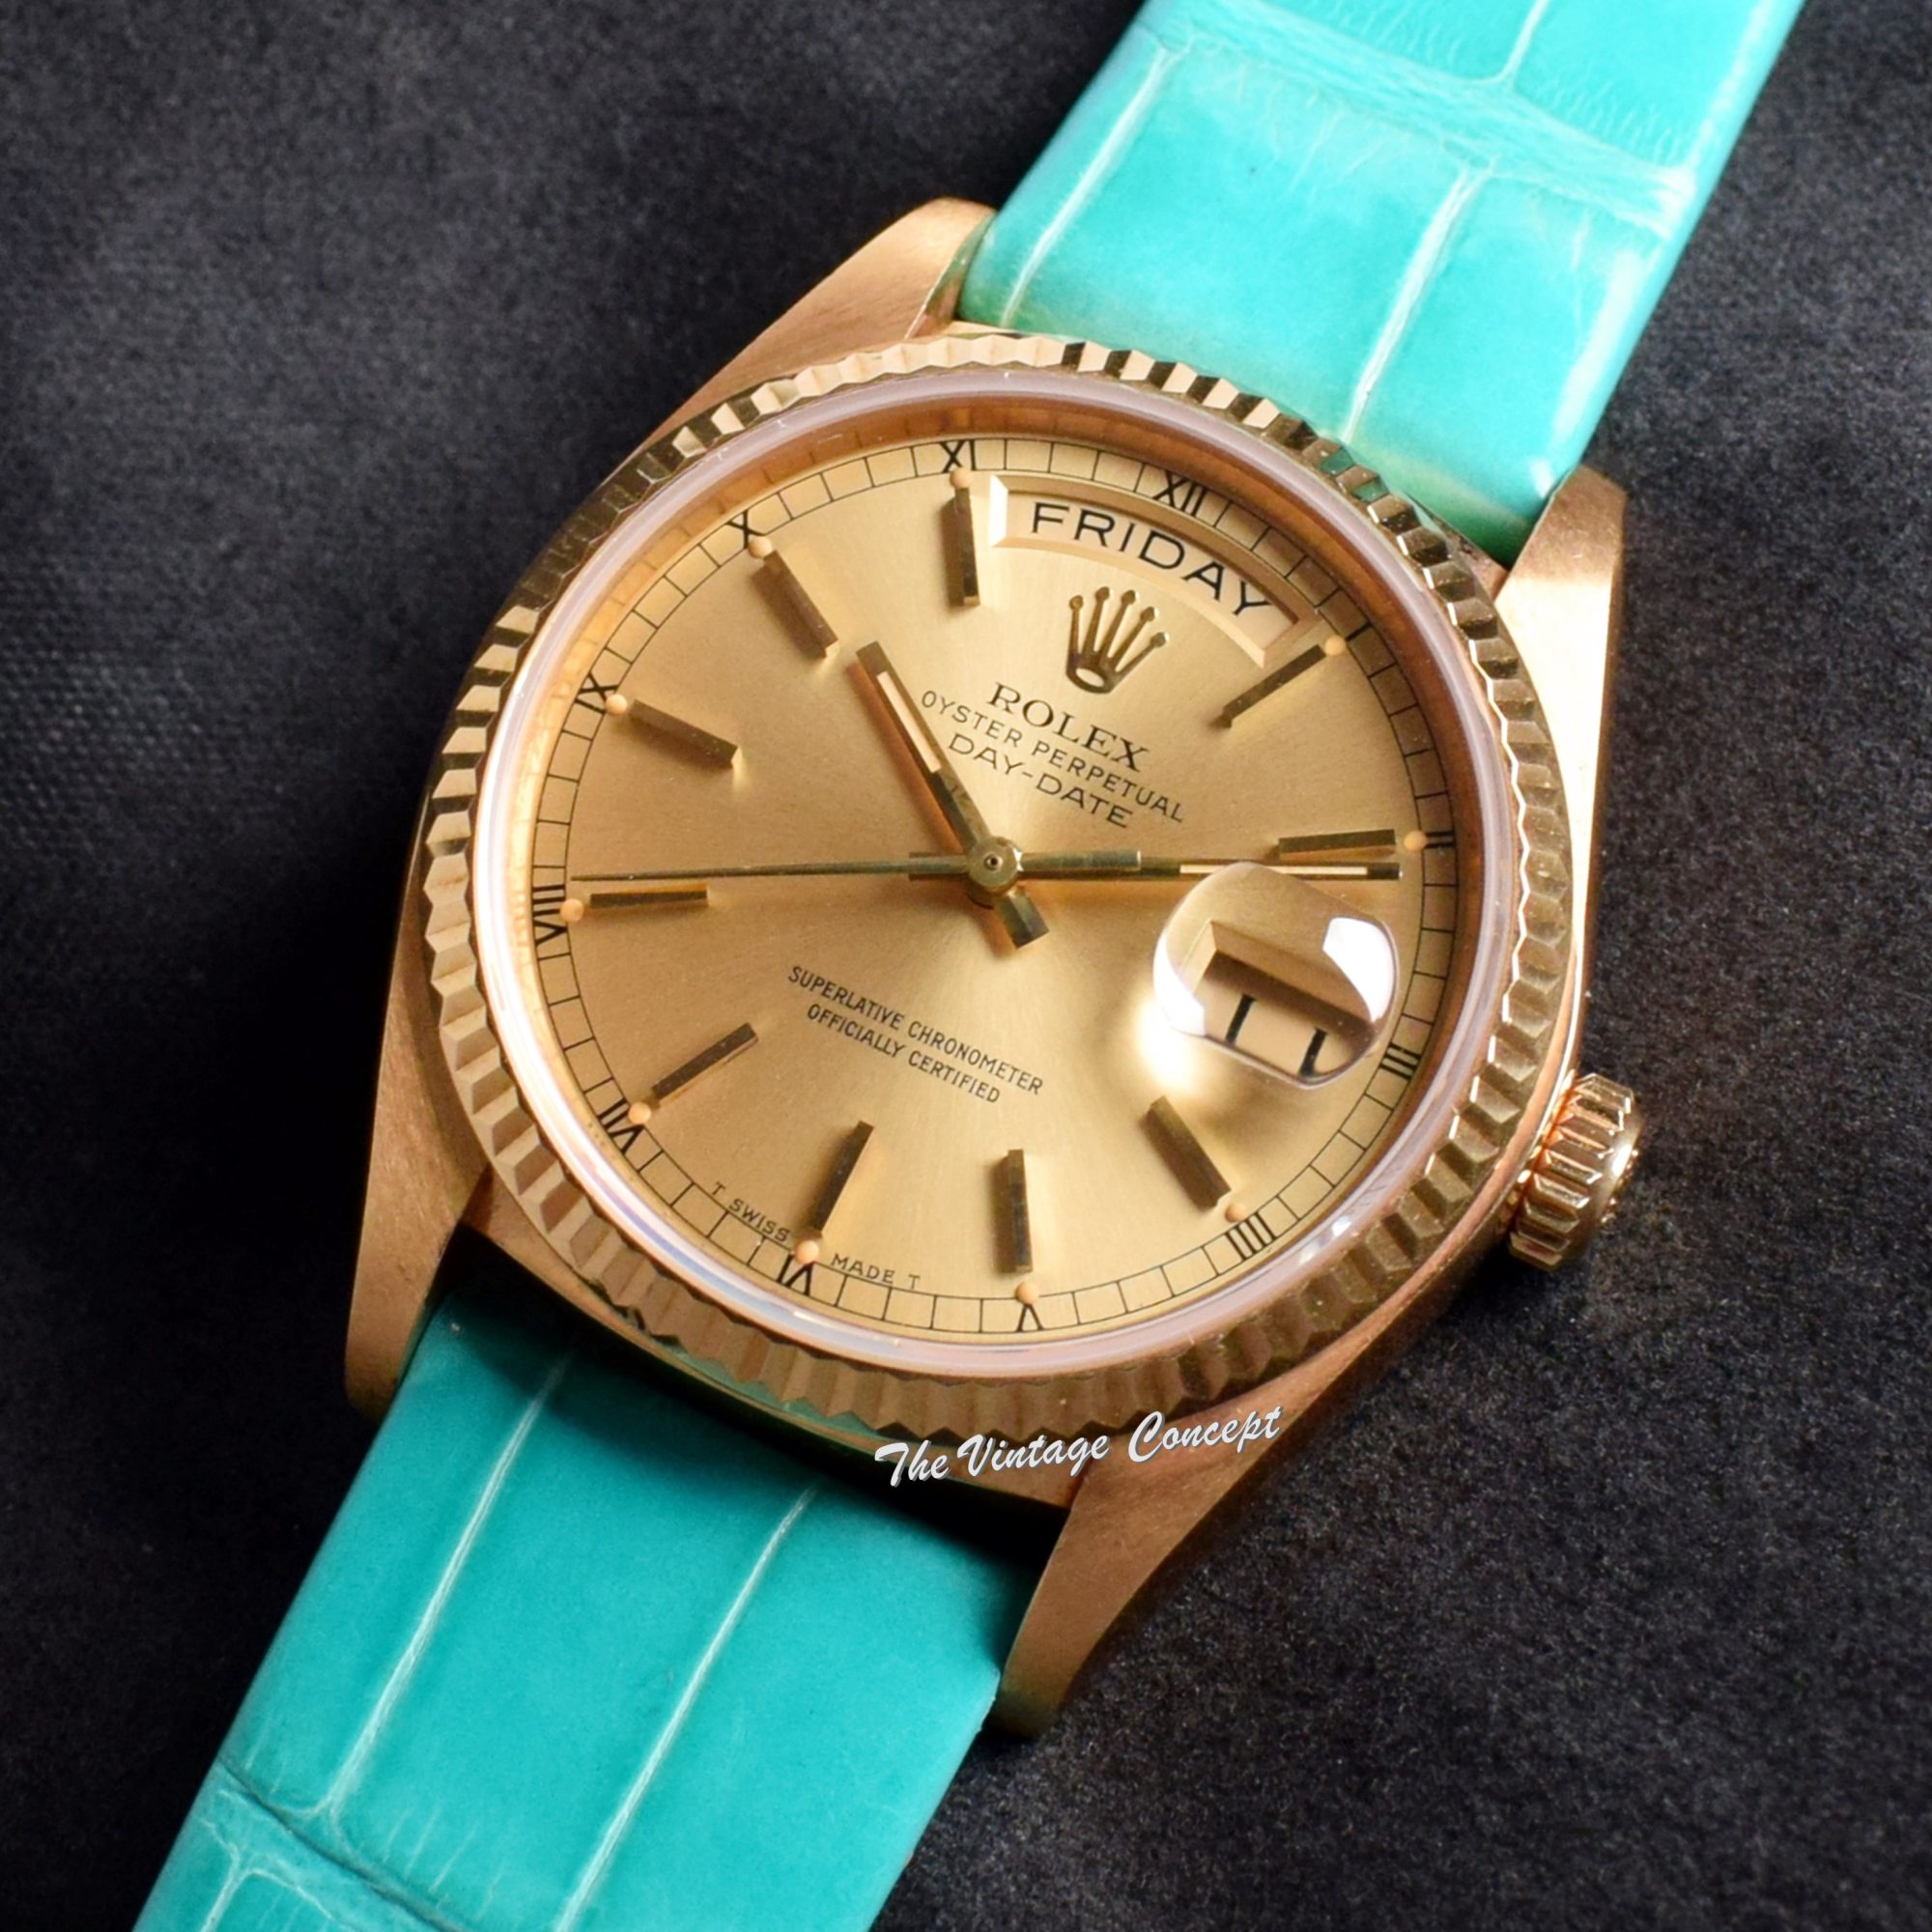 Rolex Day-Date 18K YG Gold Dial 18038 (SOLD) - The Vintage Concept